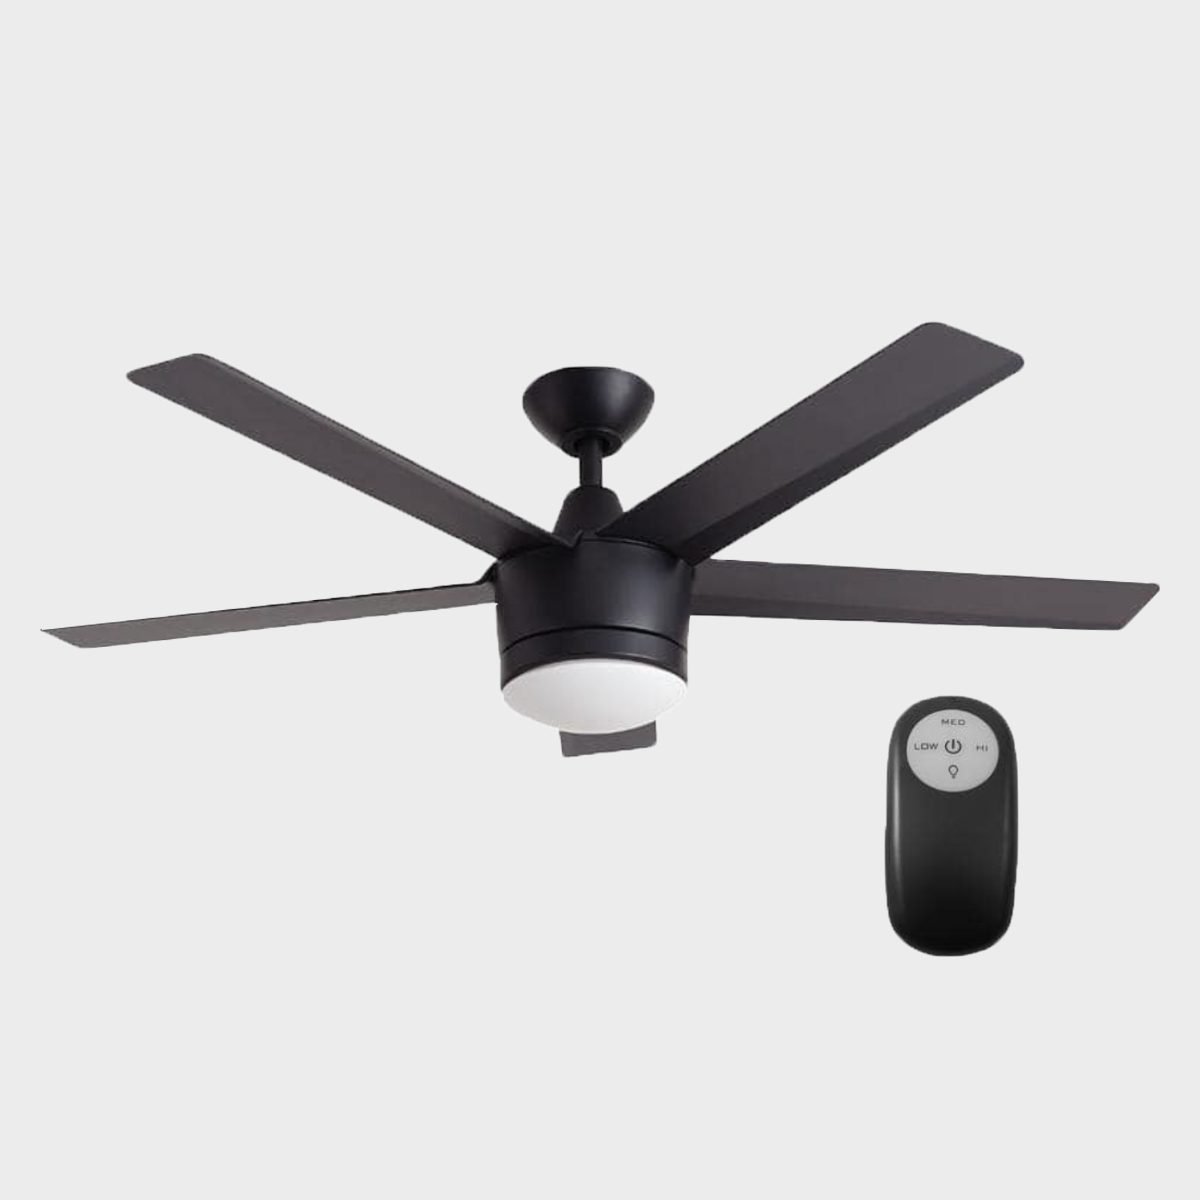 Merwry 52 In. Integrated Led Indoor Matte Black Ceiling Fan With Light Kit And Remote Control